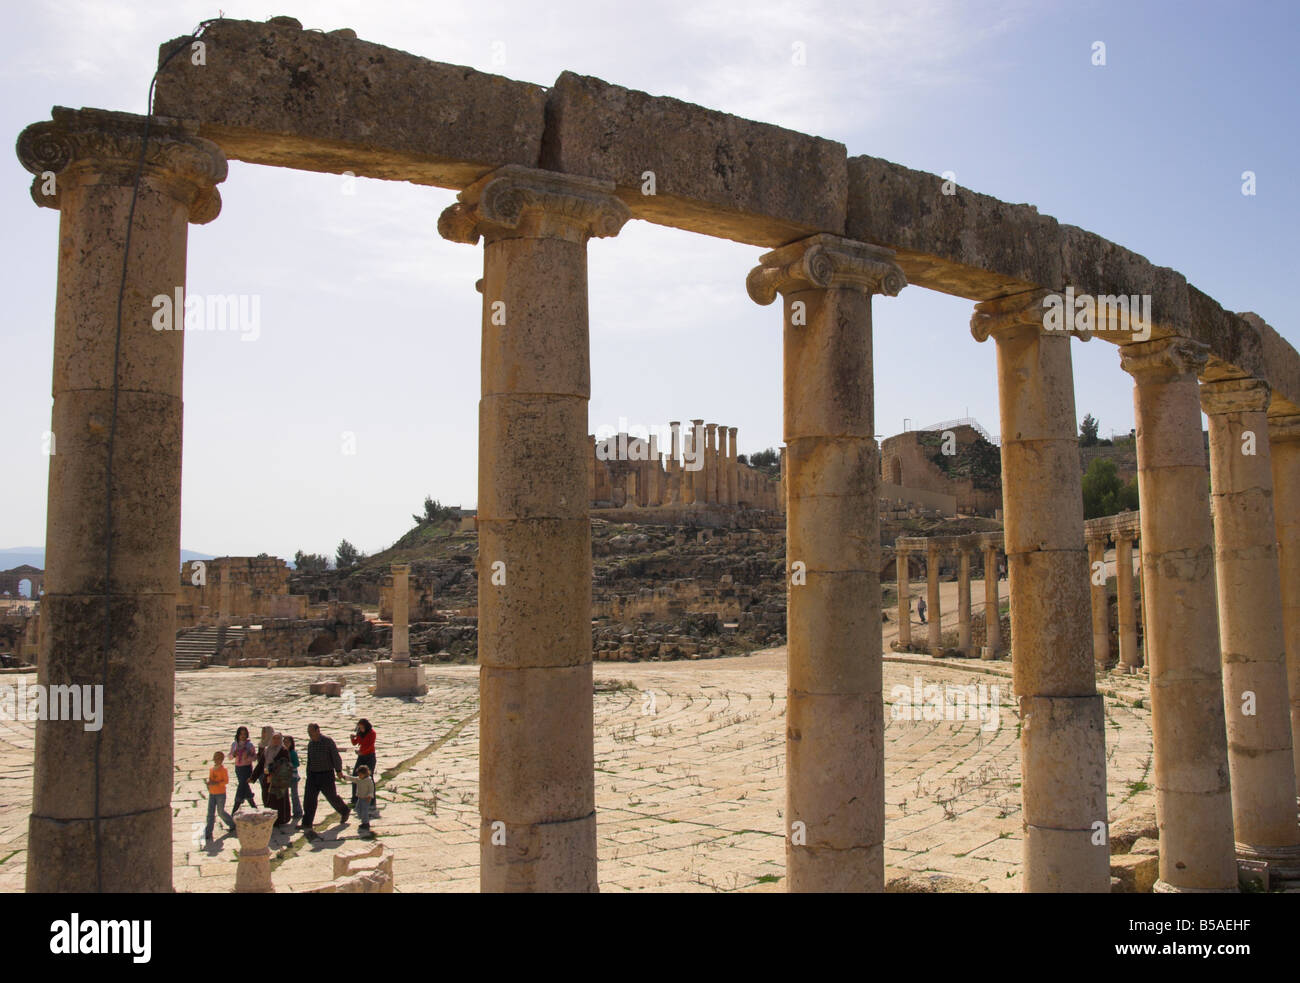 Backlit view through columns with family walking past, Jerash, Jordan, Middle East Stock Photo